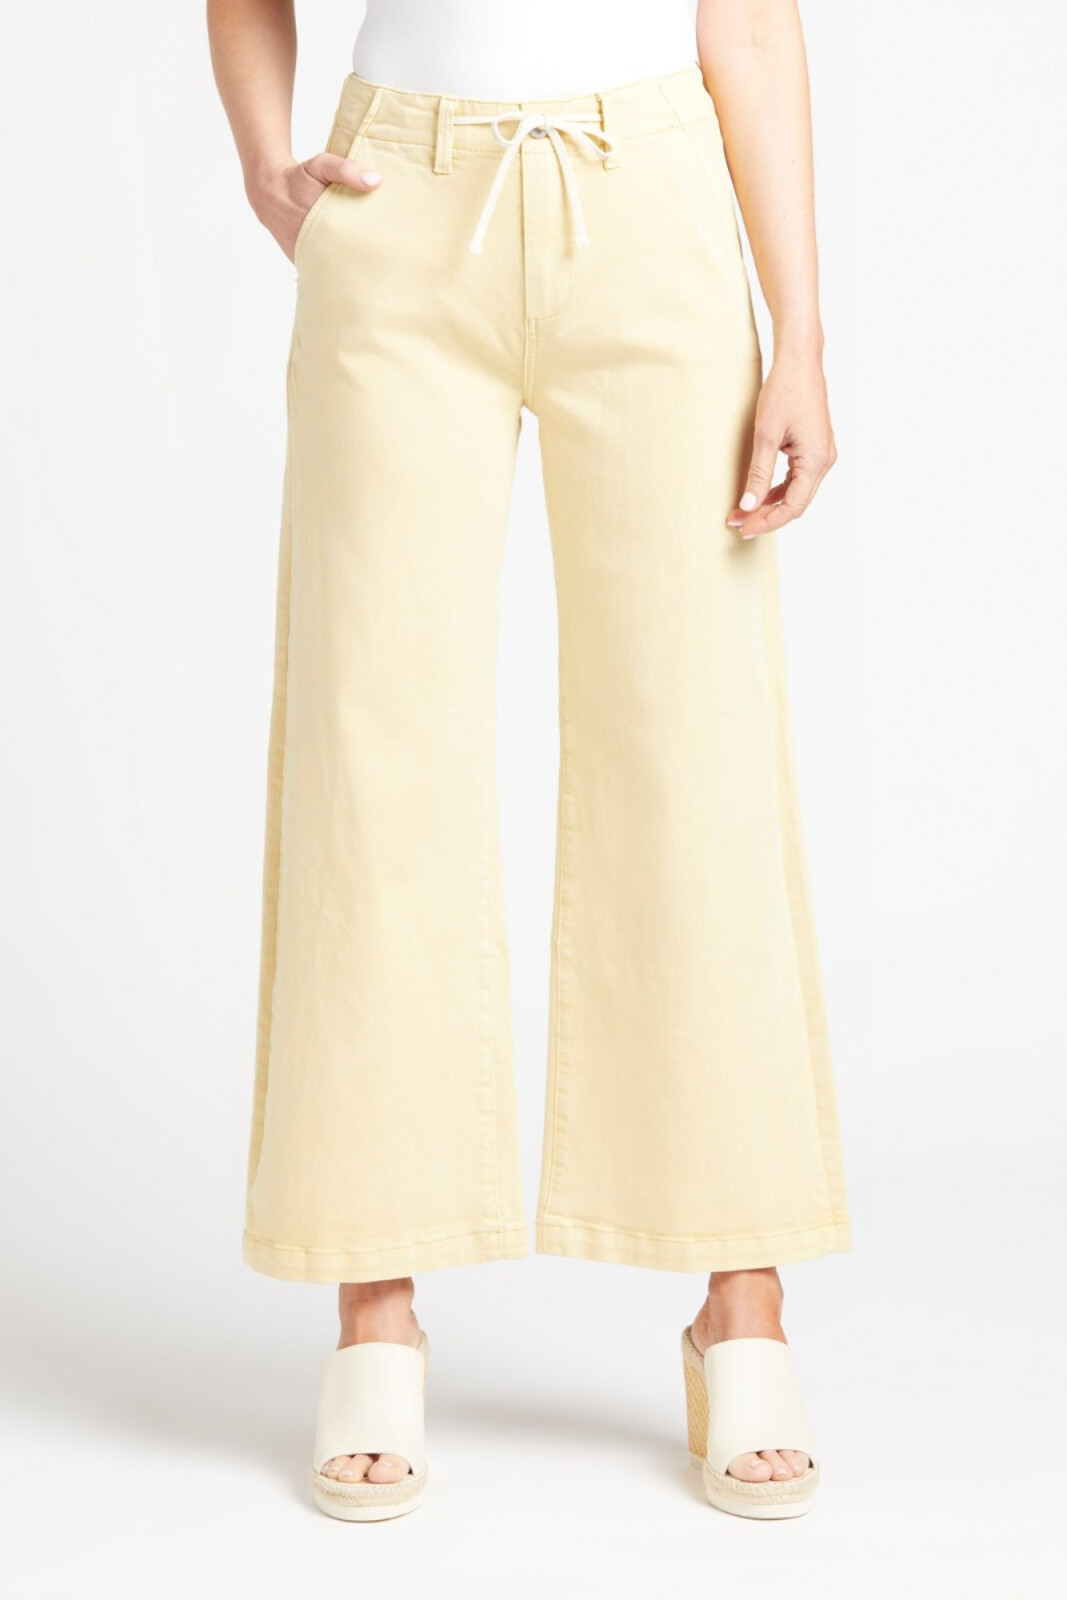 PAIGE Carly Wide Leg | EVEREVE